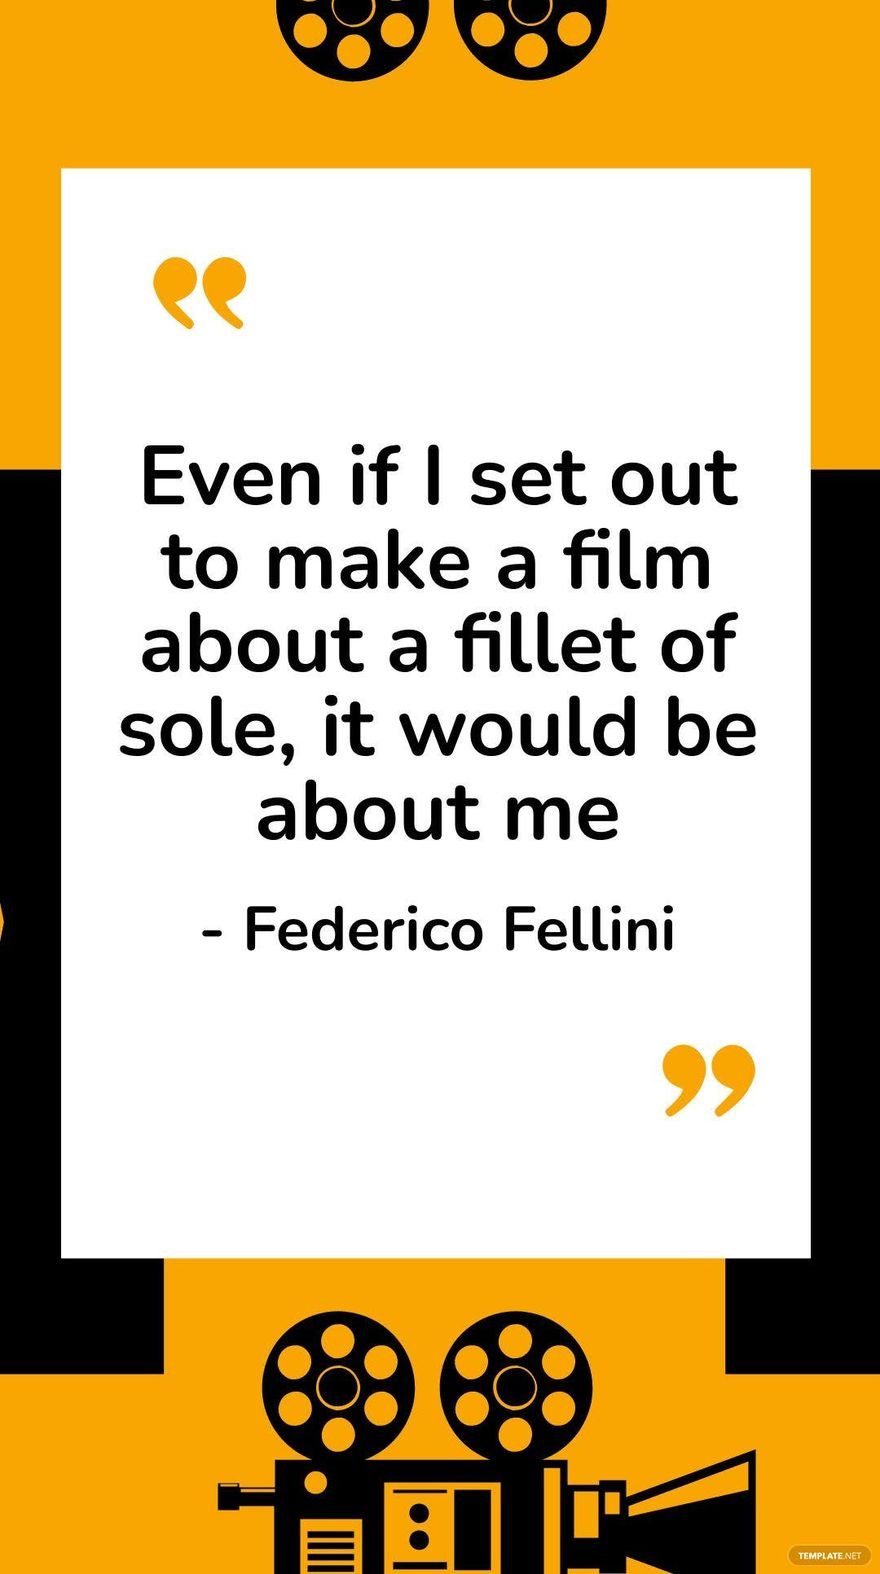 Free Federico Fellini - Even if I set out to make a film about a fillet of sole, it would be about me in JPG